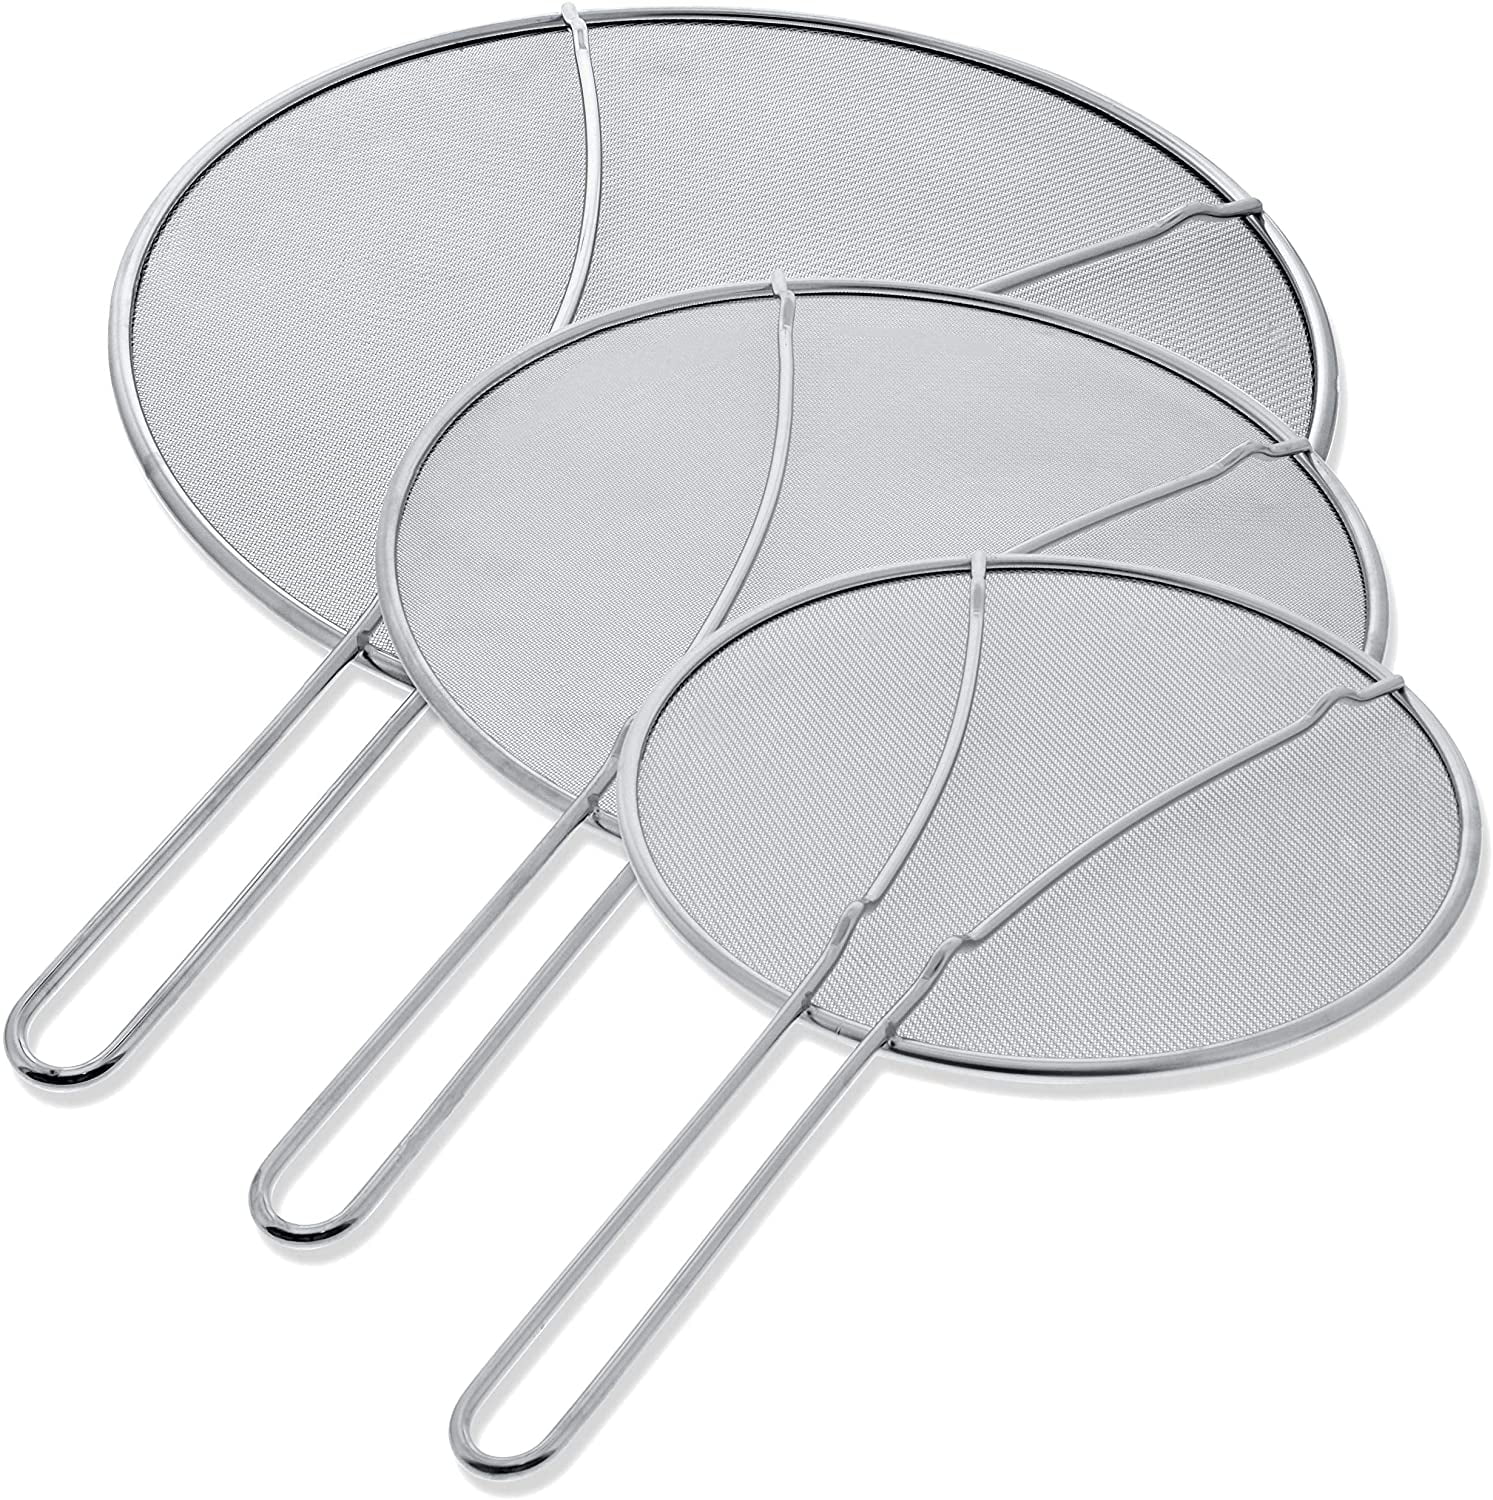 Splatter Screen Guard Strainer for Frying Pan Stainless Steel Fine Mesh Protects 